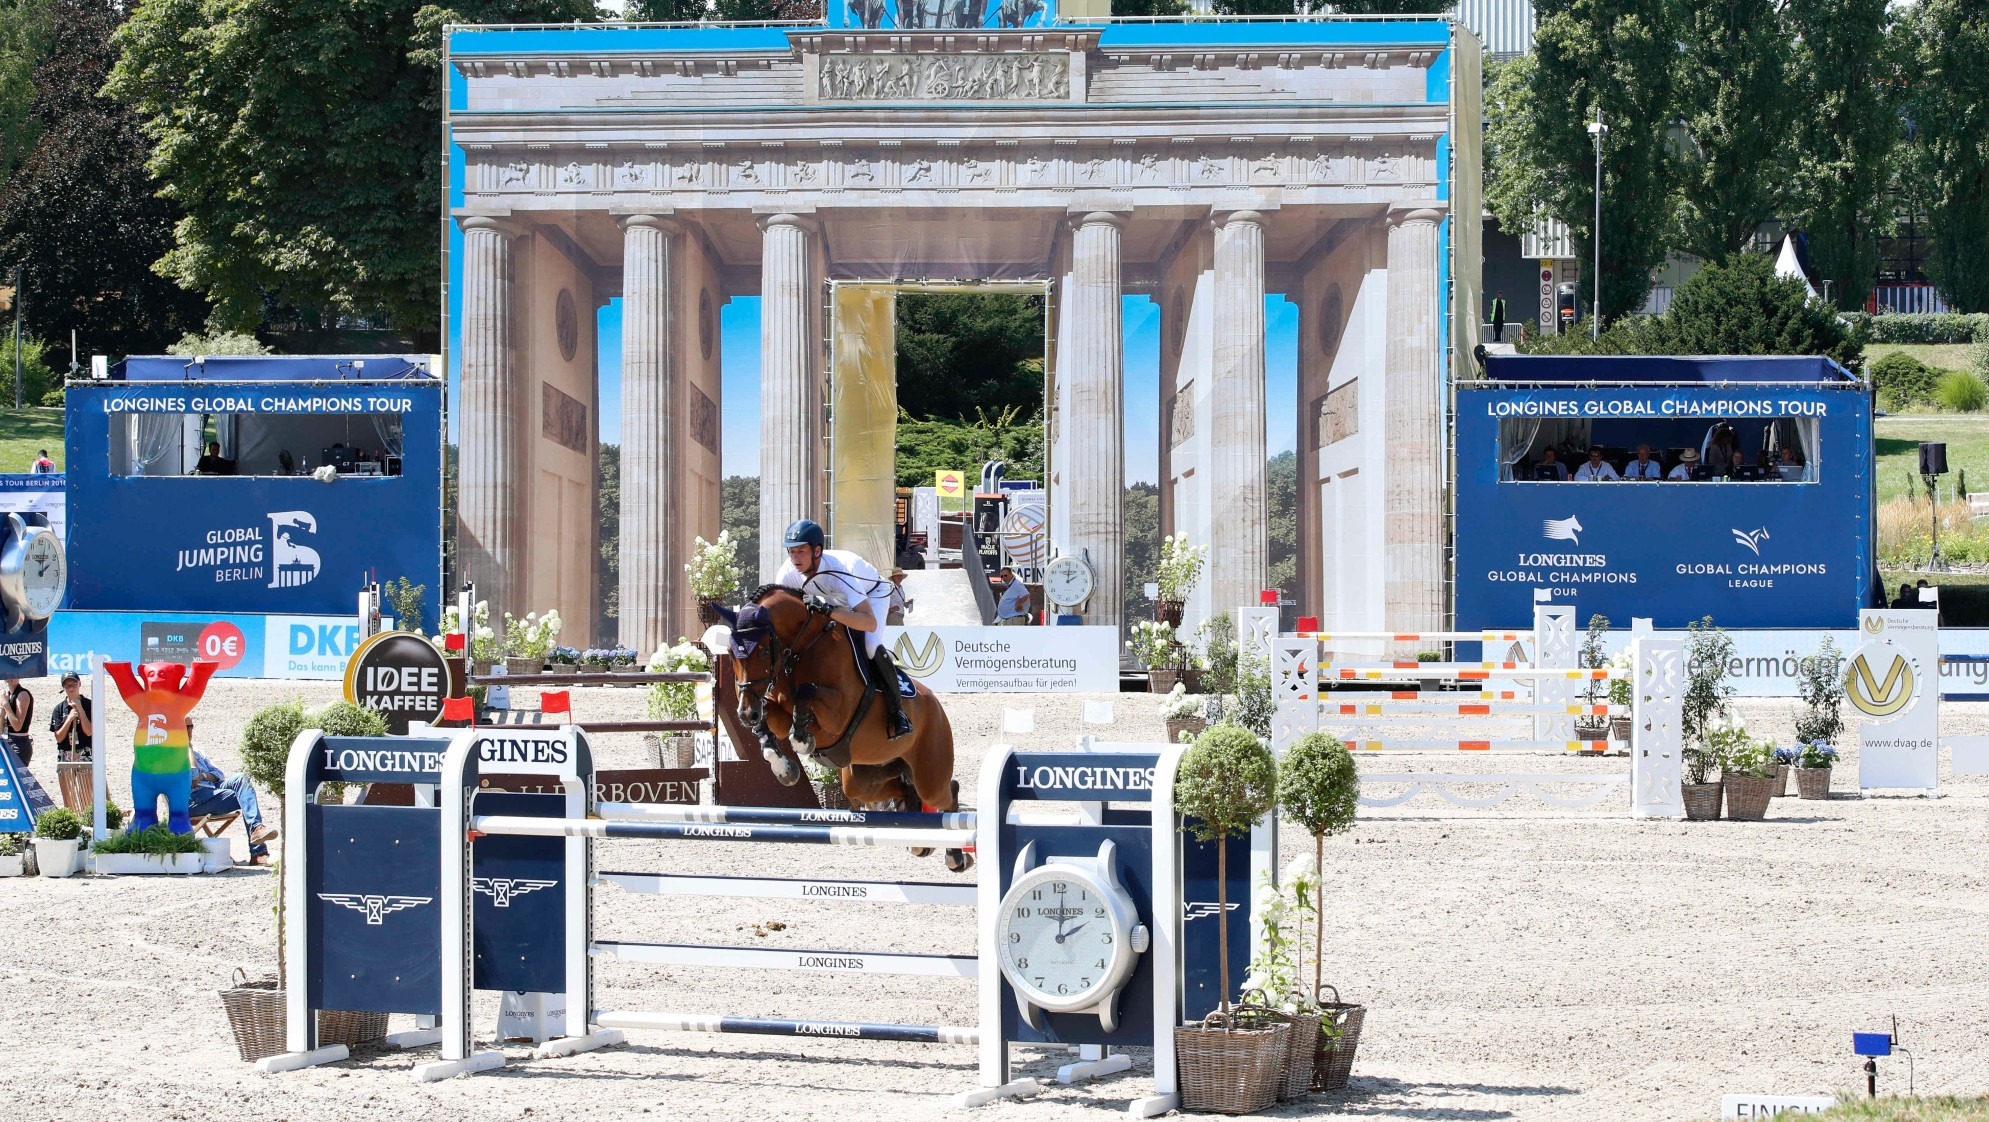 The event in Berlin will be the 13th leg of this year's LGCT circuit ©LGCT/Stefano Grasso